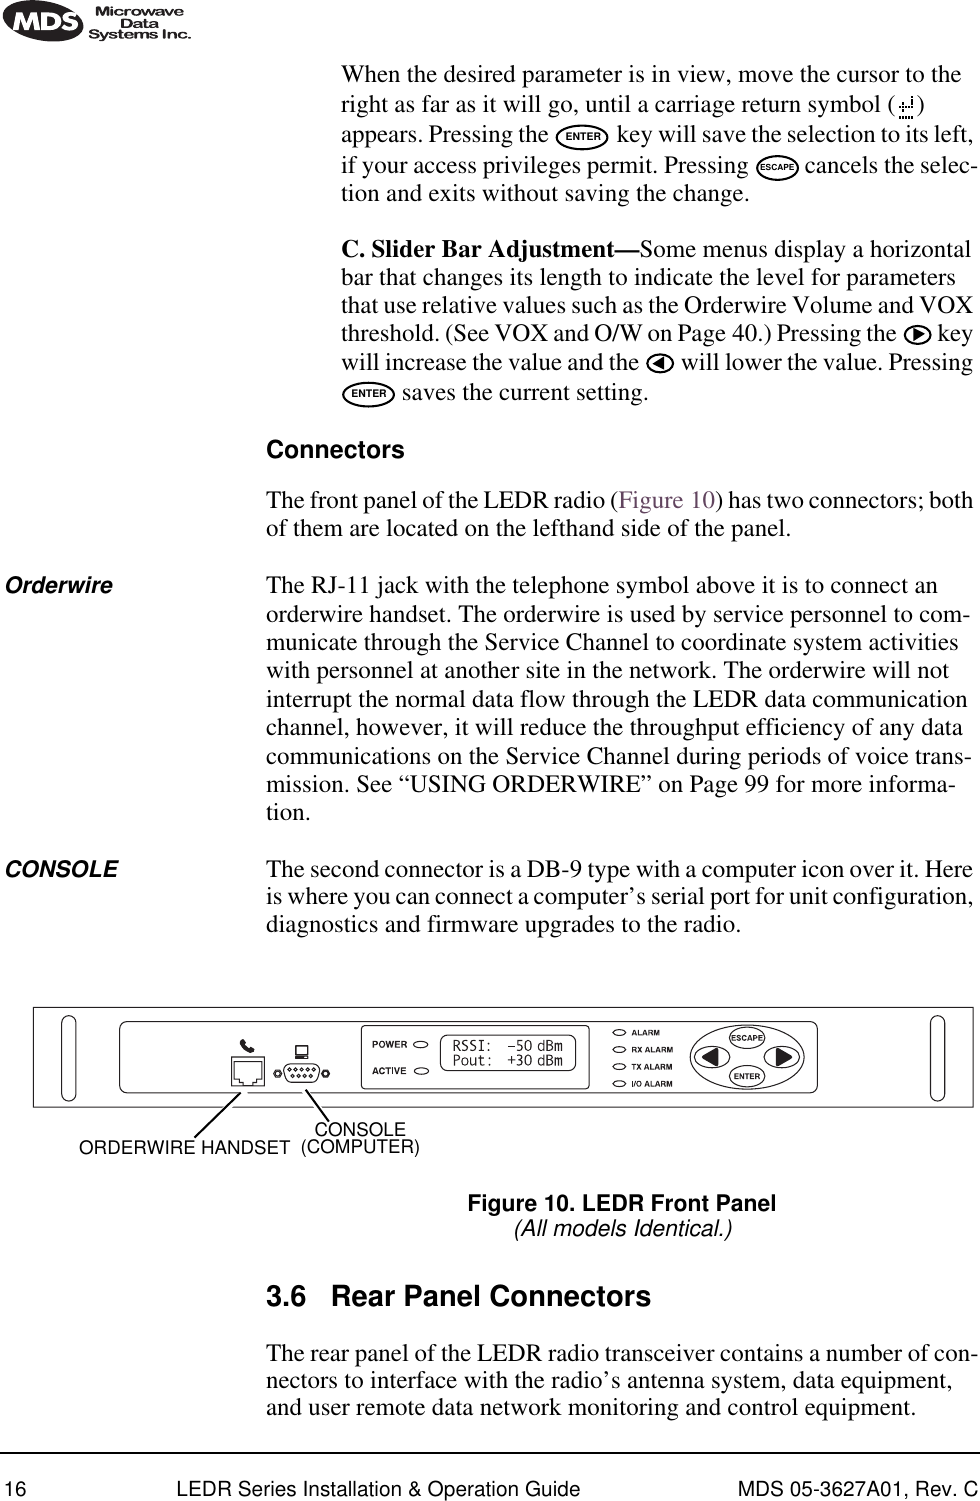 16 LEDR Series Installation &amp; Operation Guide MDS 05-3627A01, Rev. CWhen the desired parameter is in view, move the cursor to the right as far as it will go, until a carriage return symbol ( ) appears. Pressing the   key will save the selection to its left, if your access privileges permit. Pressing   cancels the selec-tion and exits without saving the change.C. Slider Bar Adjustment—Some menus display a horizontal bar that changes its length to indicate the level for parameters that use relative values such as the Orderwire Volume and VOX threshold. (See VOX and O/W on Page 40.) Pressing the   key will increase the value and the   will lower the value. Pressing  saves the current setting.ConnectorsThe front panel of the LEDR radio (Figure 10) has two connectors; both of them are located on the lefthand side of the panel. Orderwire The RJ-11 jack with the telephone symbol above it is to connect an orderwire handset. The orderwire is used by service personnel to com-municate through the Service Channel to coordinate system activities with personnel at another site in the network. The orderwire will not interrupt the normal data flow through the LEDR data communication channel, however, it will reduce the throughput efficiency of any data communications on the Service Channel during periods of voice trans-mission. See “USING ORDERWIRE” on Page 99 for more informa-tion.CONSOLE The second connector is a DB-9 type with a computer icon over it. Here is where you can connect a computer’s serial port for unit configuration, diagnostics and firmware upgrades to the radio.Invisible place holderFigure 10. LEDR Front Panel(All models Identical.)3.6 Rear Panel ConnectorsThe rear panel of the LEDR radio transceiver contains a number of con-nectors to interface with the radio’s antenna system, data equipment, and user remote data network monitoring and control equipment.ENTERESCAPEENTERCONSOLE(COMPUTER)ORDERWIRE HANDSET